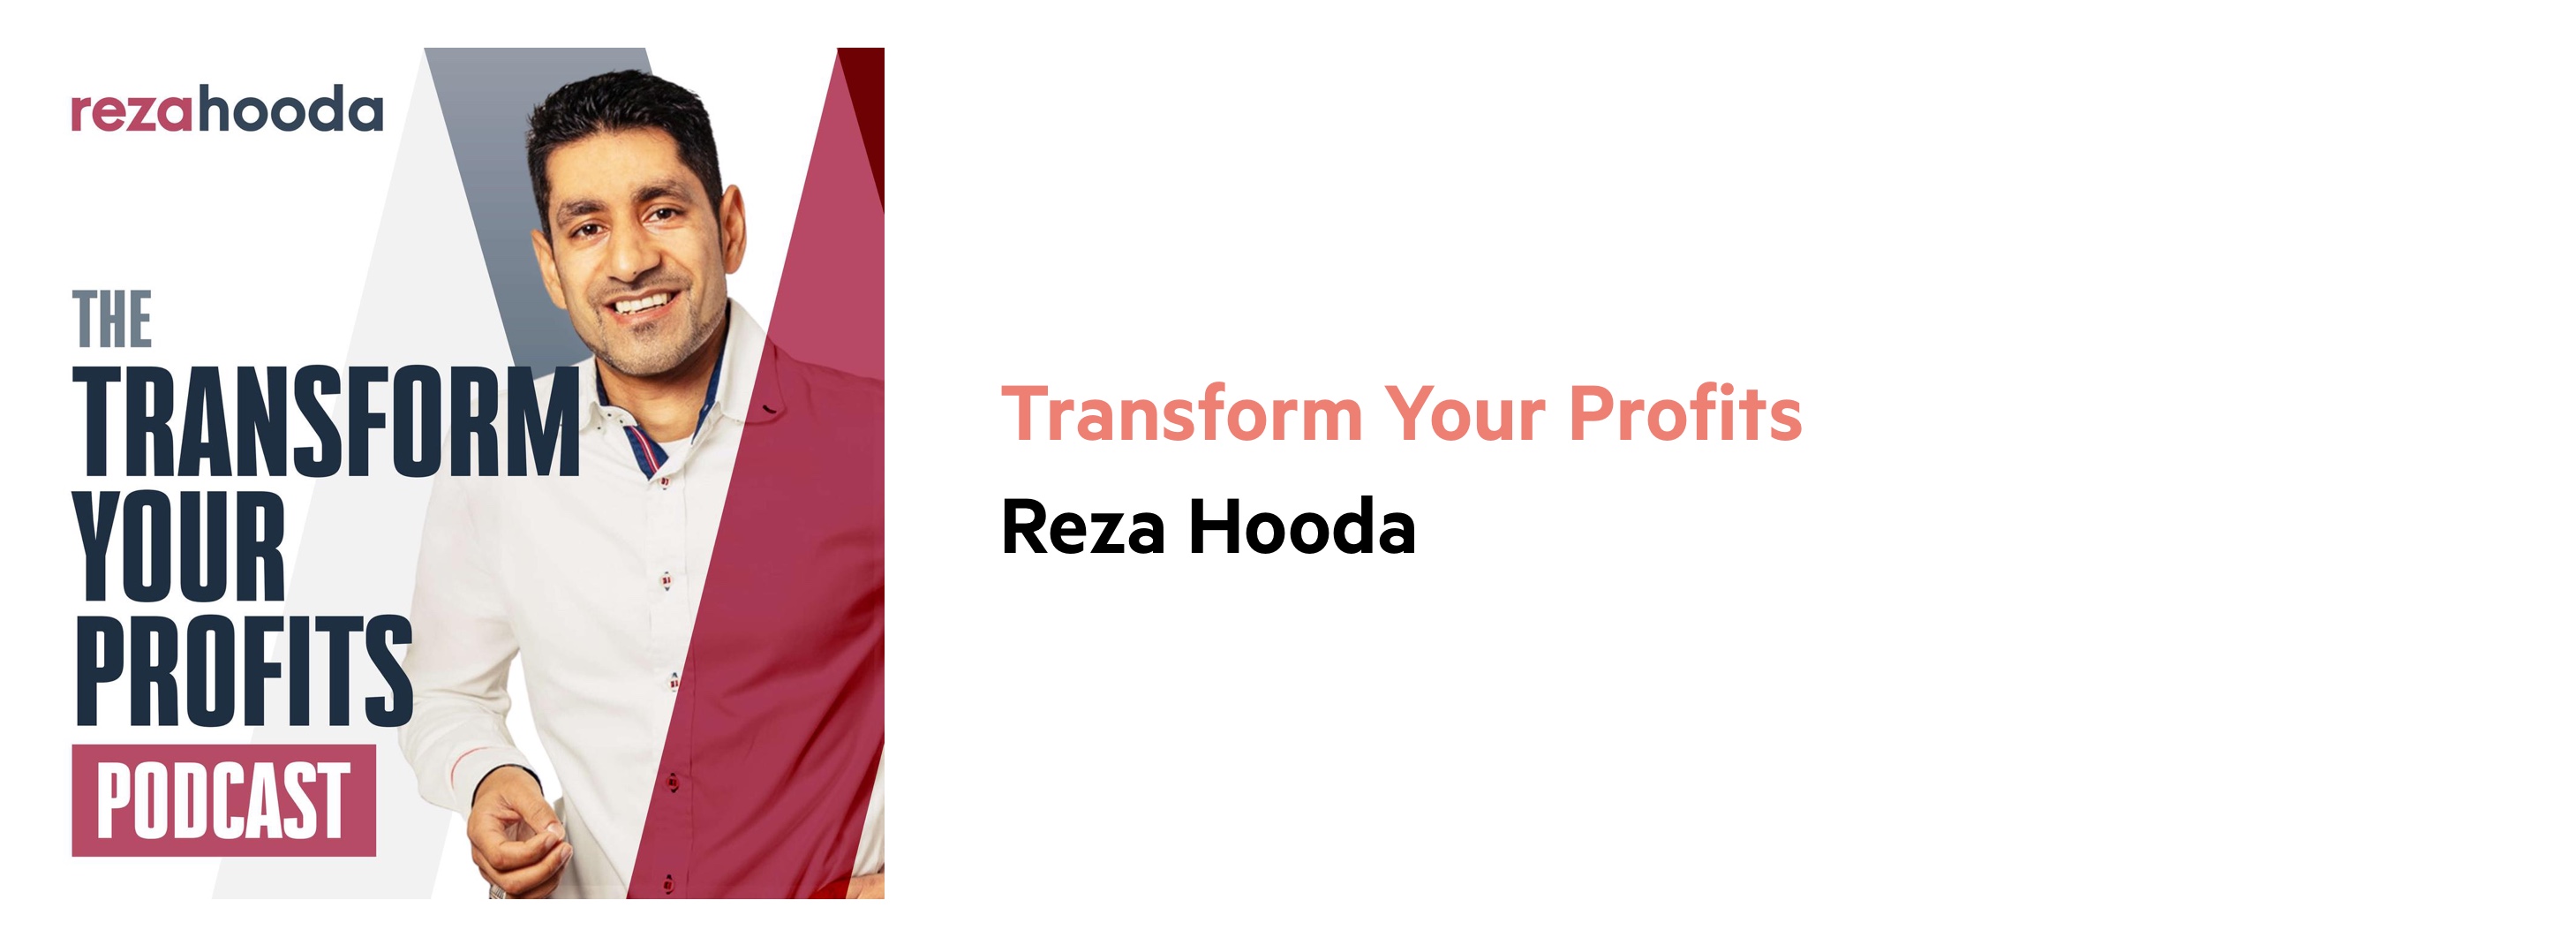 UK podcast for accountants and bookkeepers: Transform Your Profits by Reza Hooda